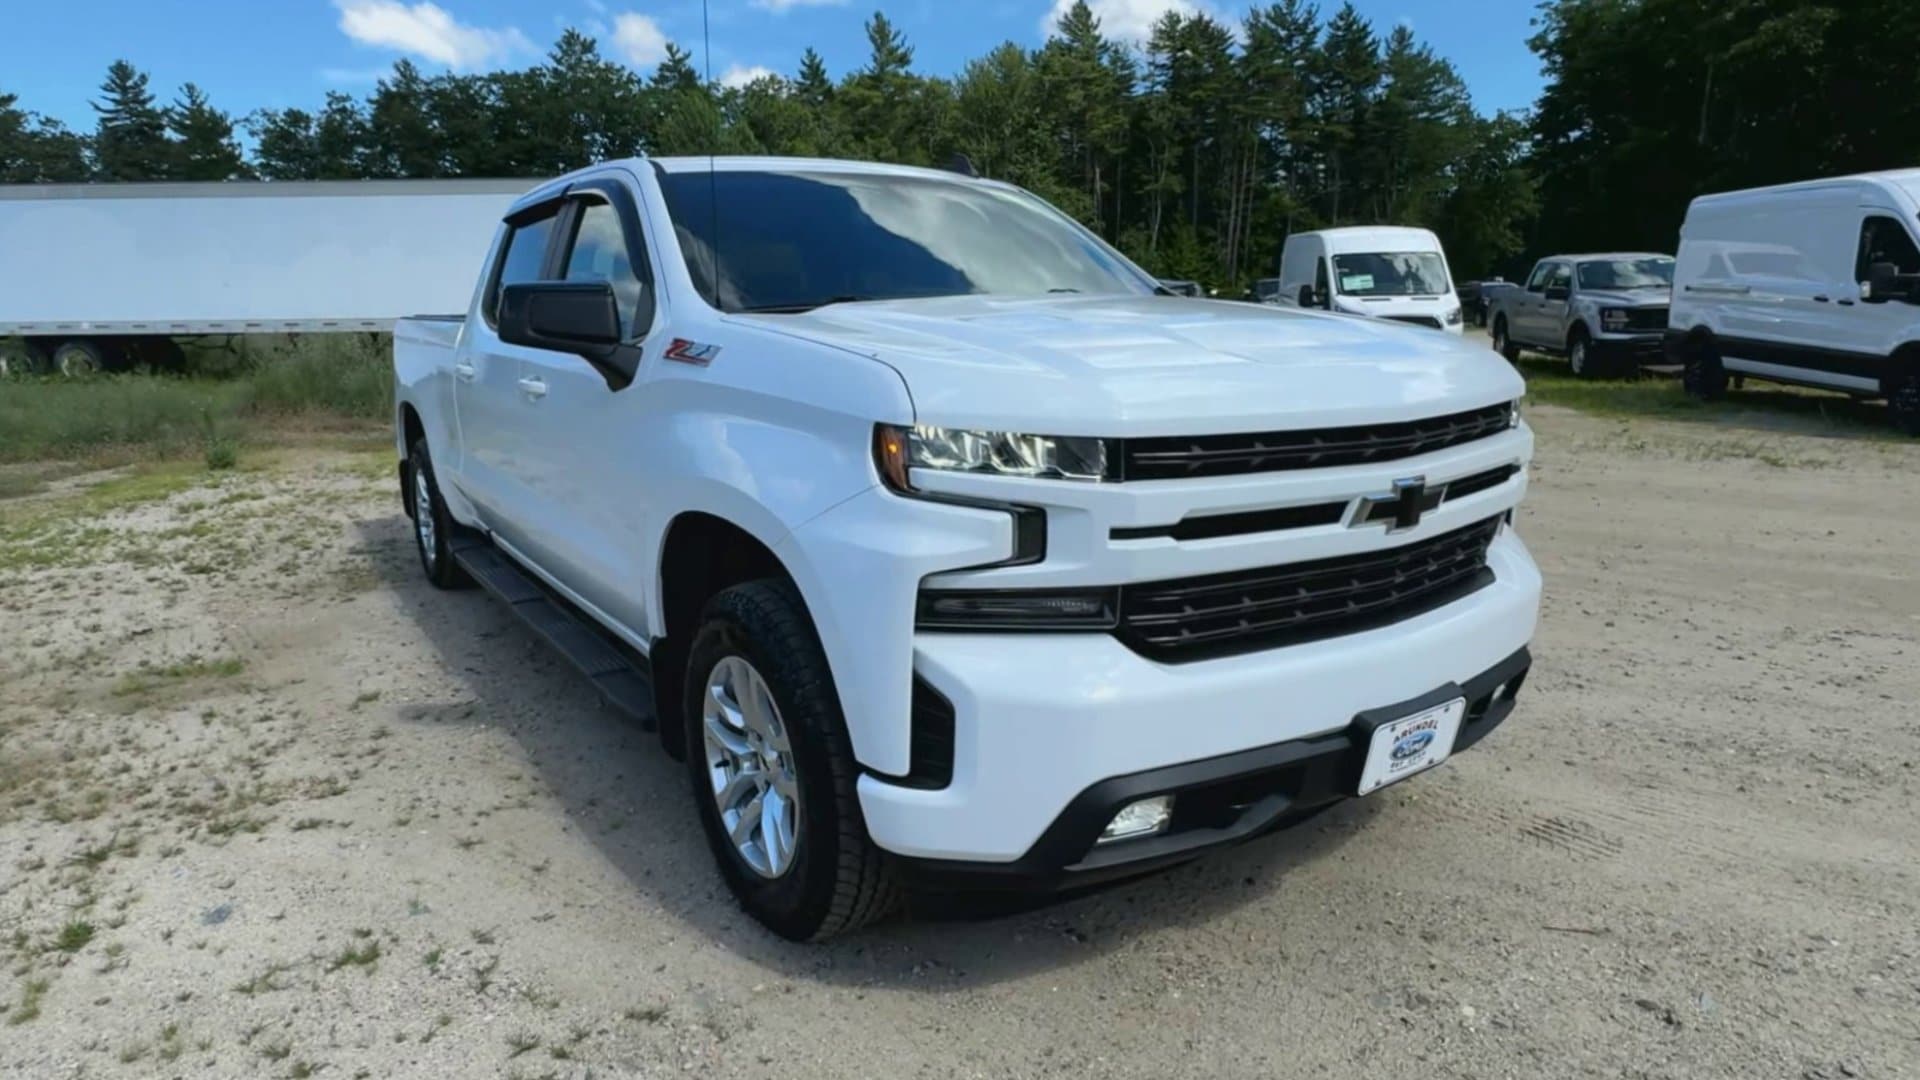 Used 2020 Chevrolet Silverado 1500 RST with VIN 1GCUYEED1LZ158768 for sale in Arundel, ME